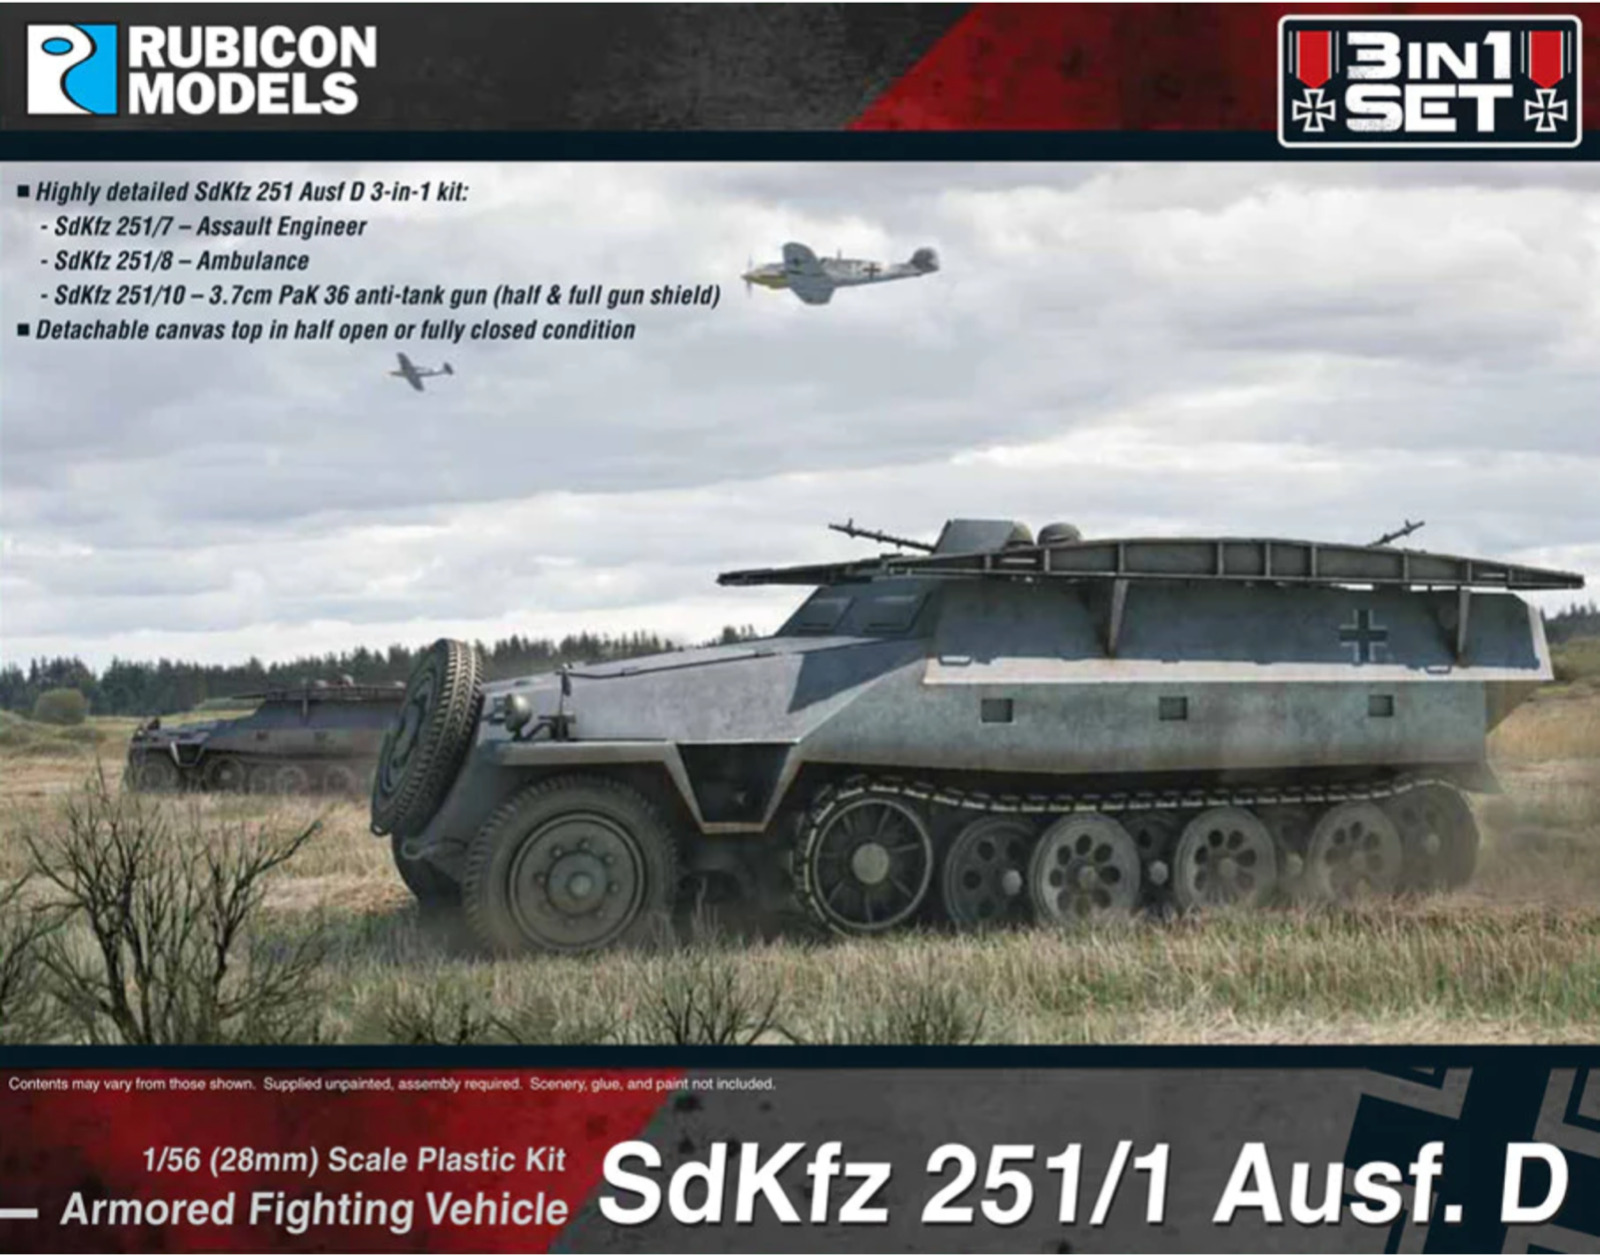 Rubicon 1/56th Wwii German Sdkfz 251d 3-in-1 Set Model Kit New Free Shipping!